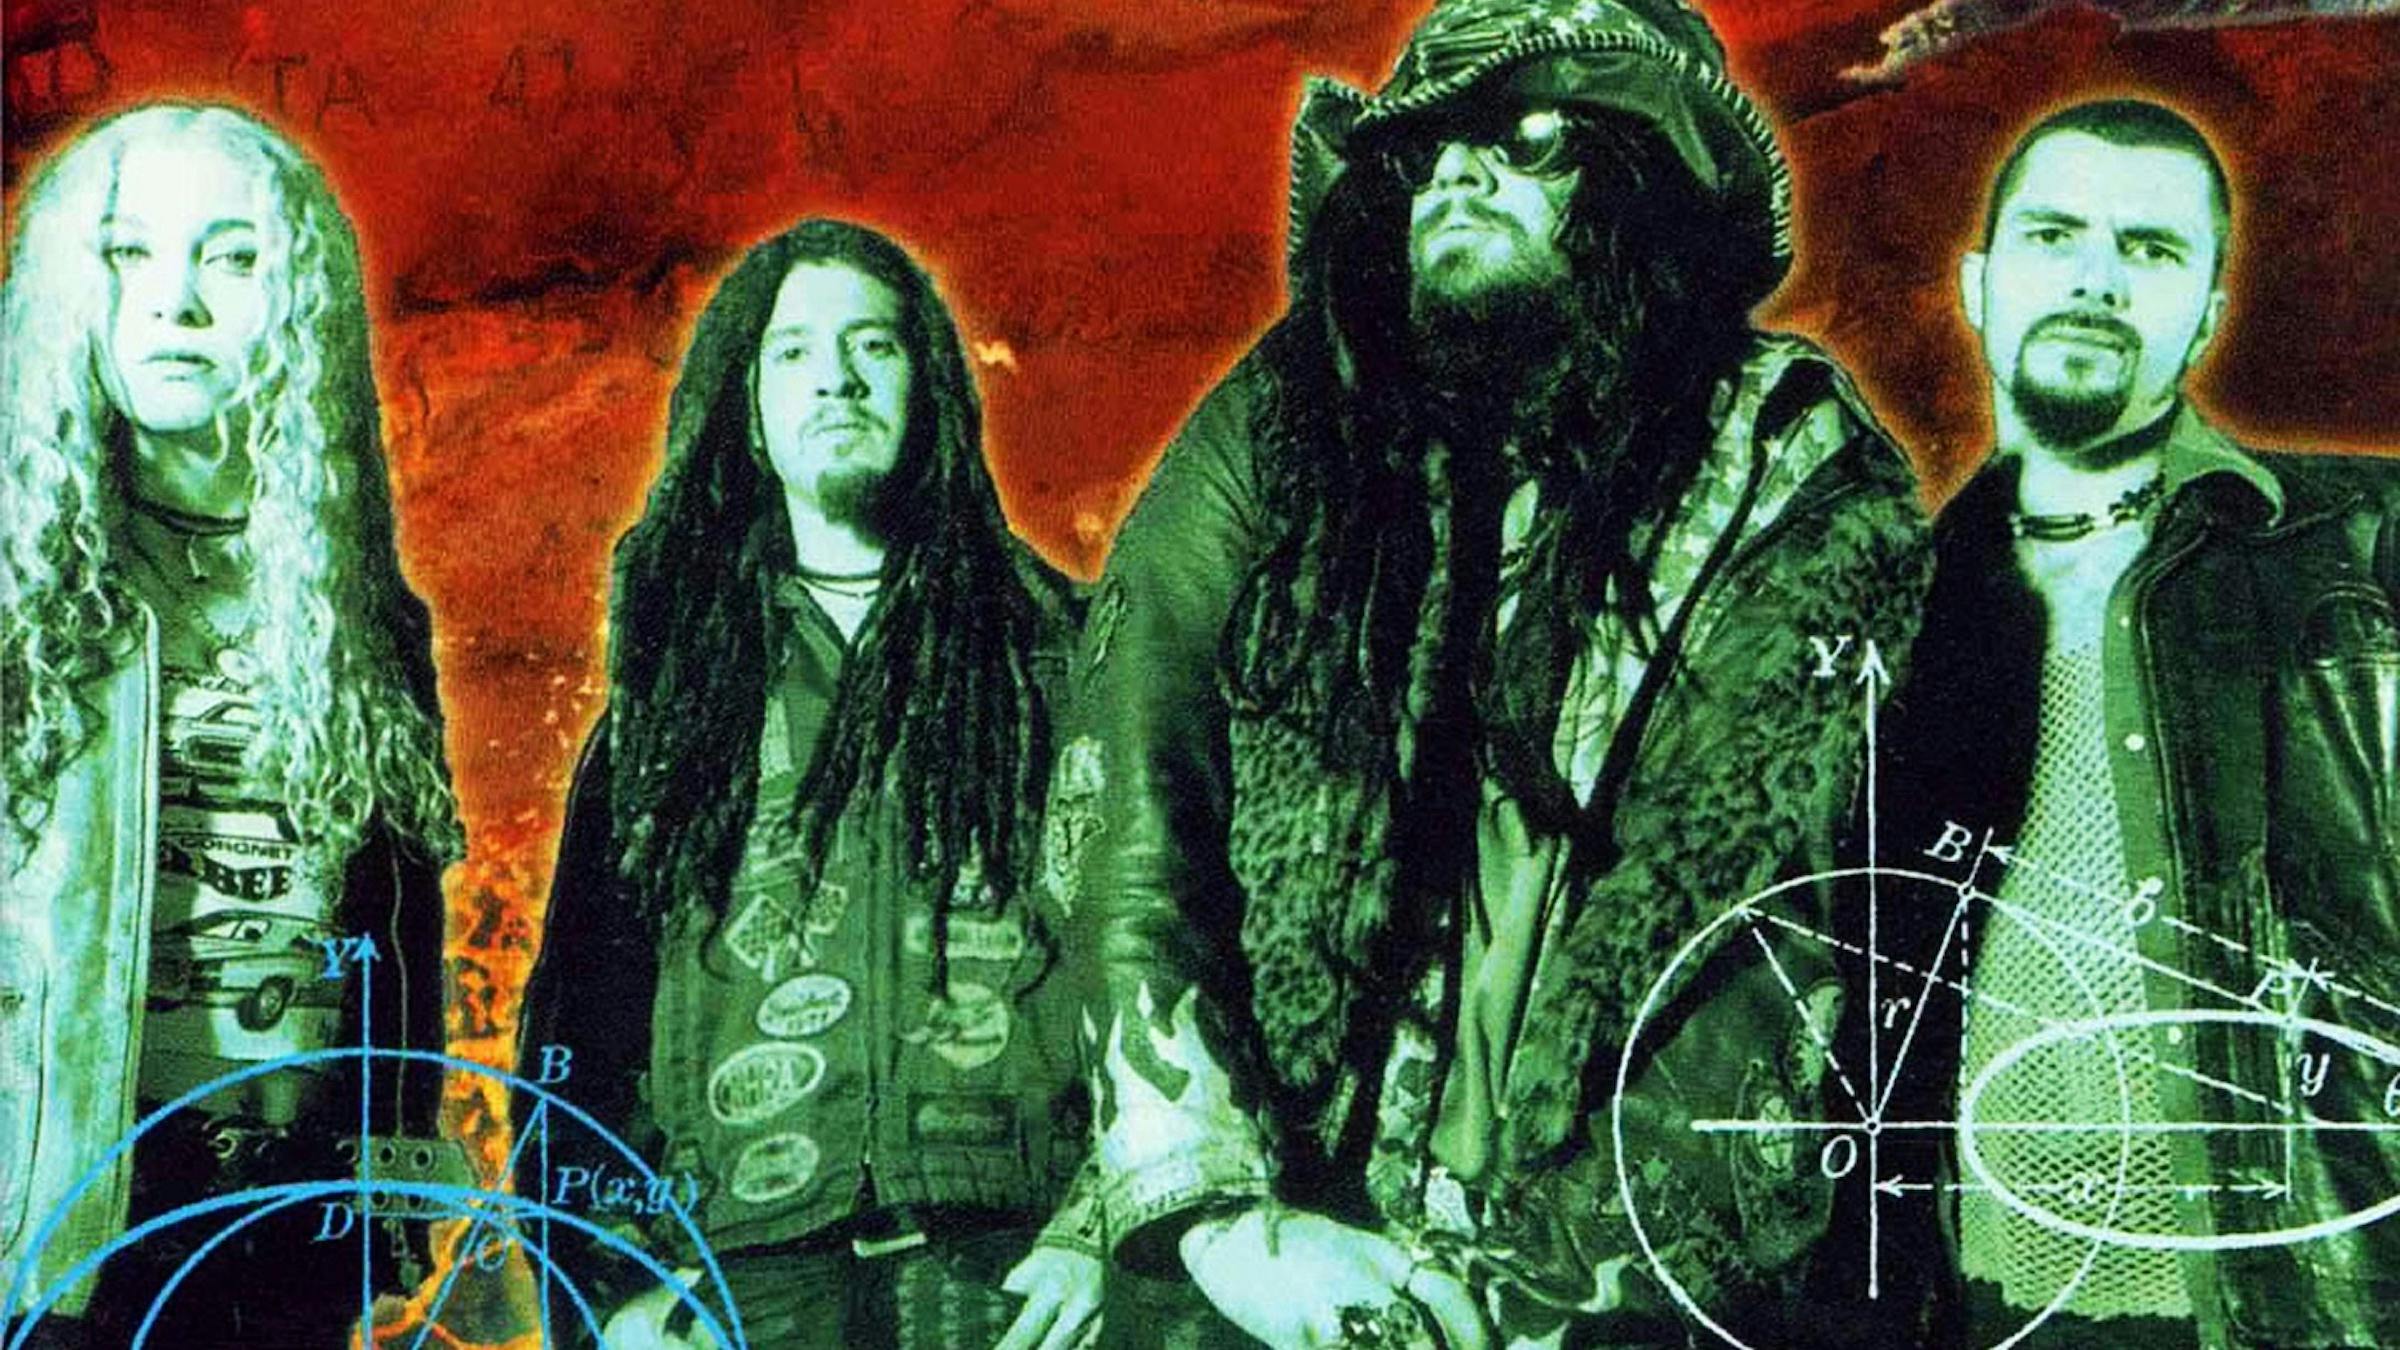 Here's The Origin Of The Moaning From White Zombie's More Human Than Human